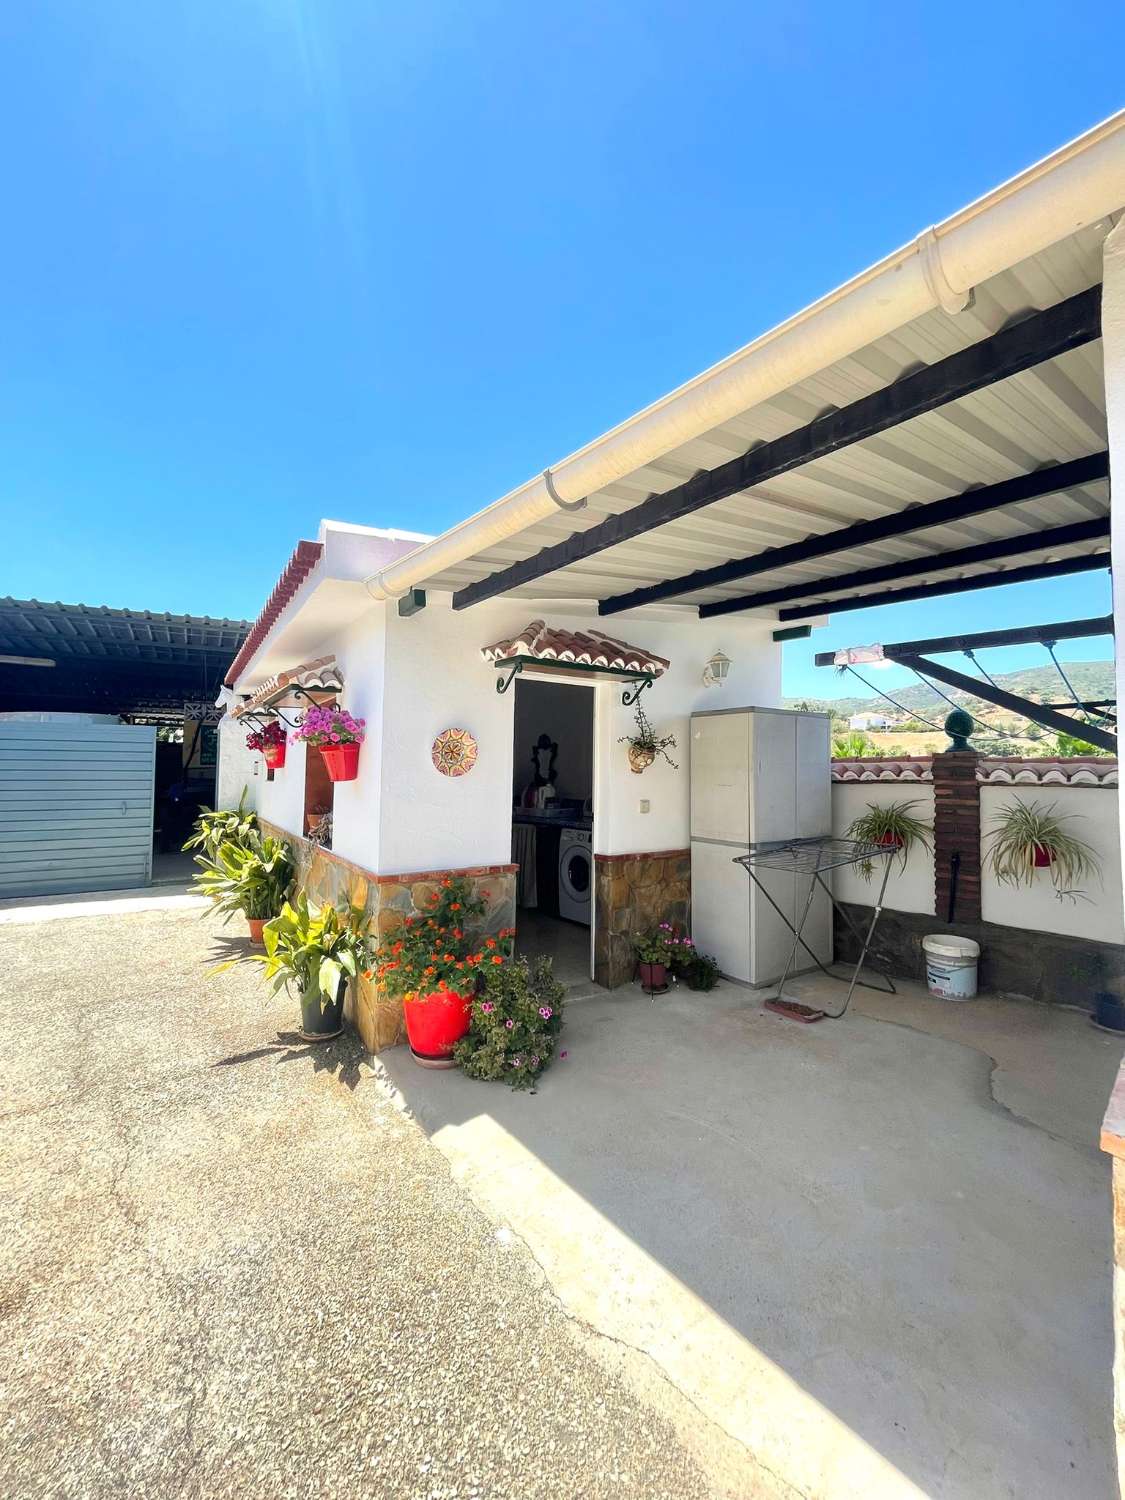 Finca with house and facilities for horses in Alhaurin de la Torre.